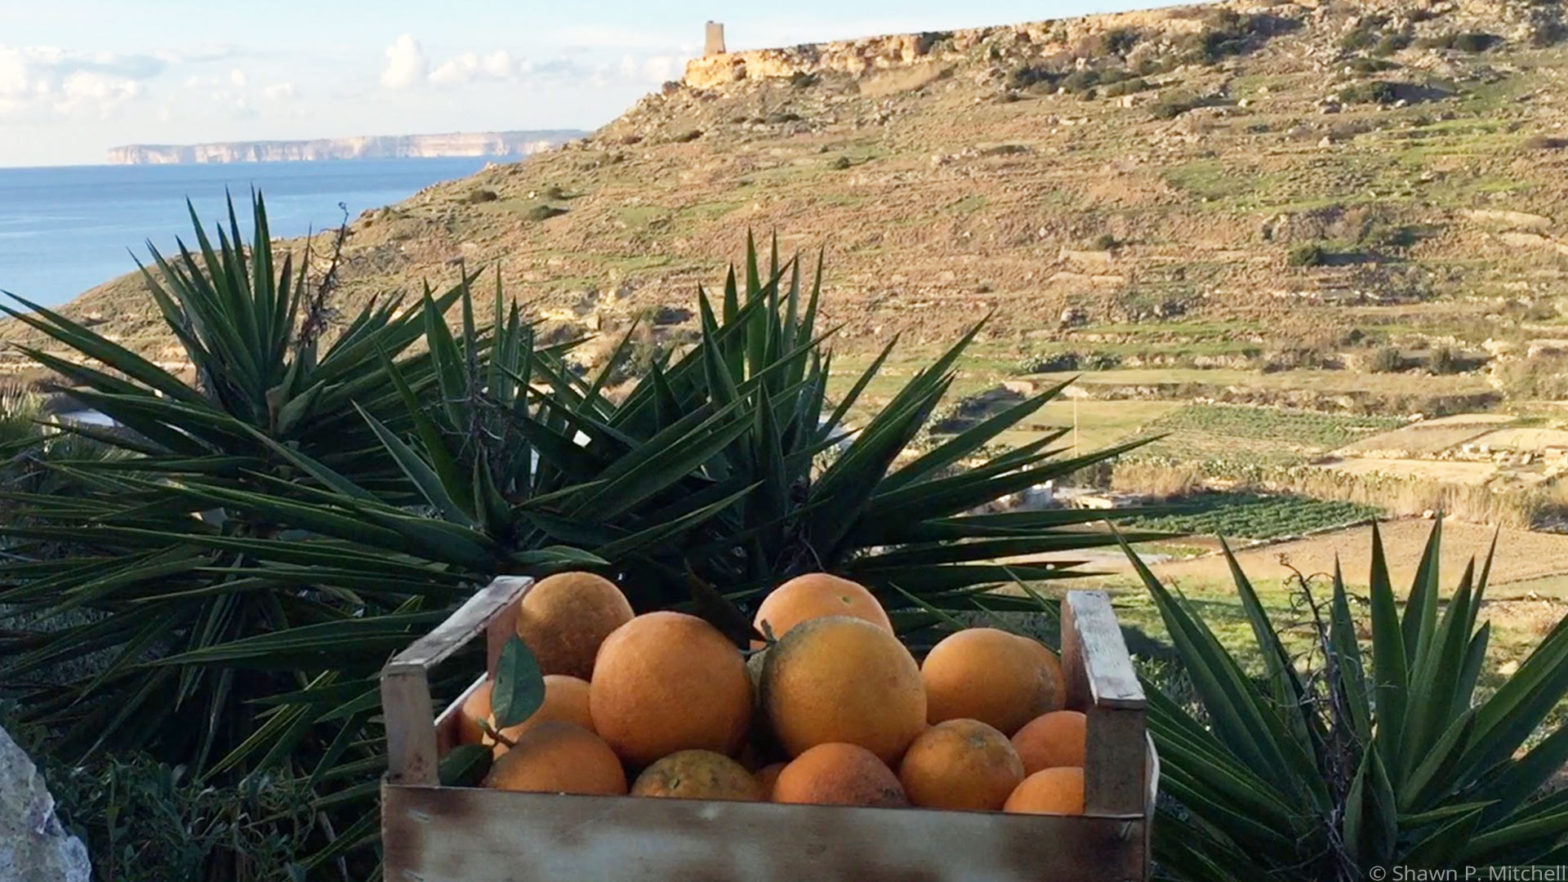 A wooden box of freshly harvested oranges in Malta.